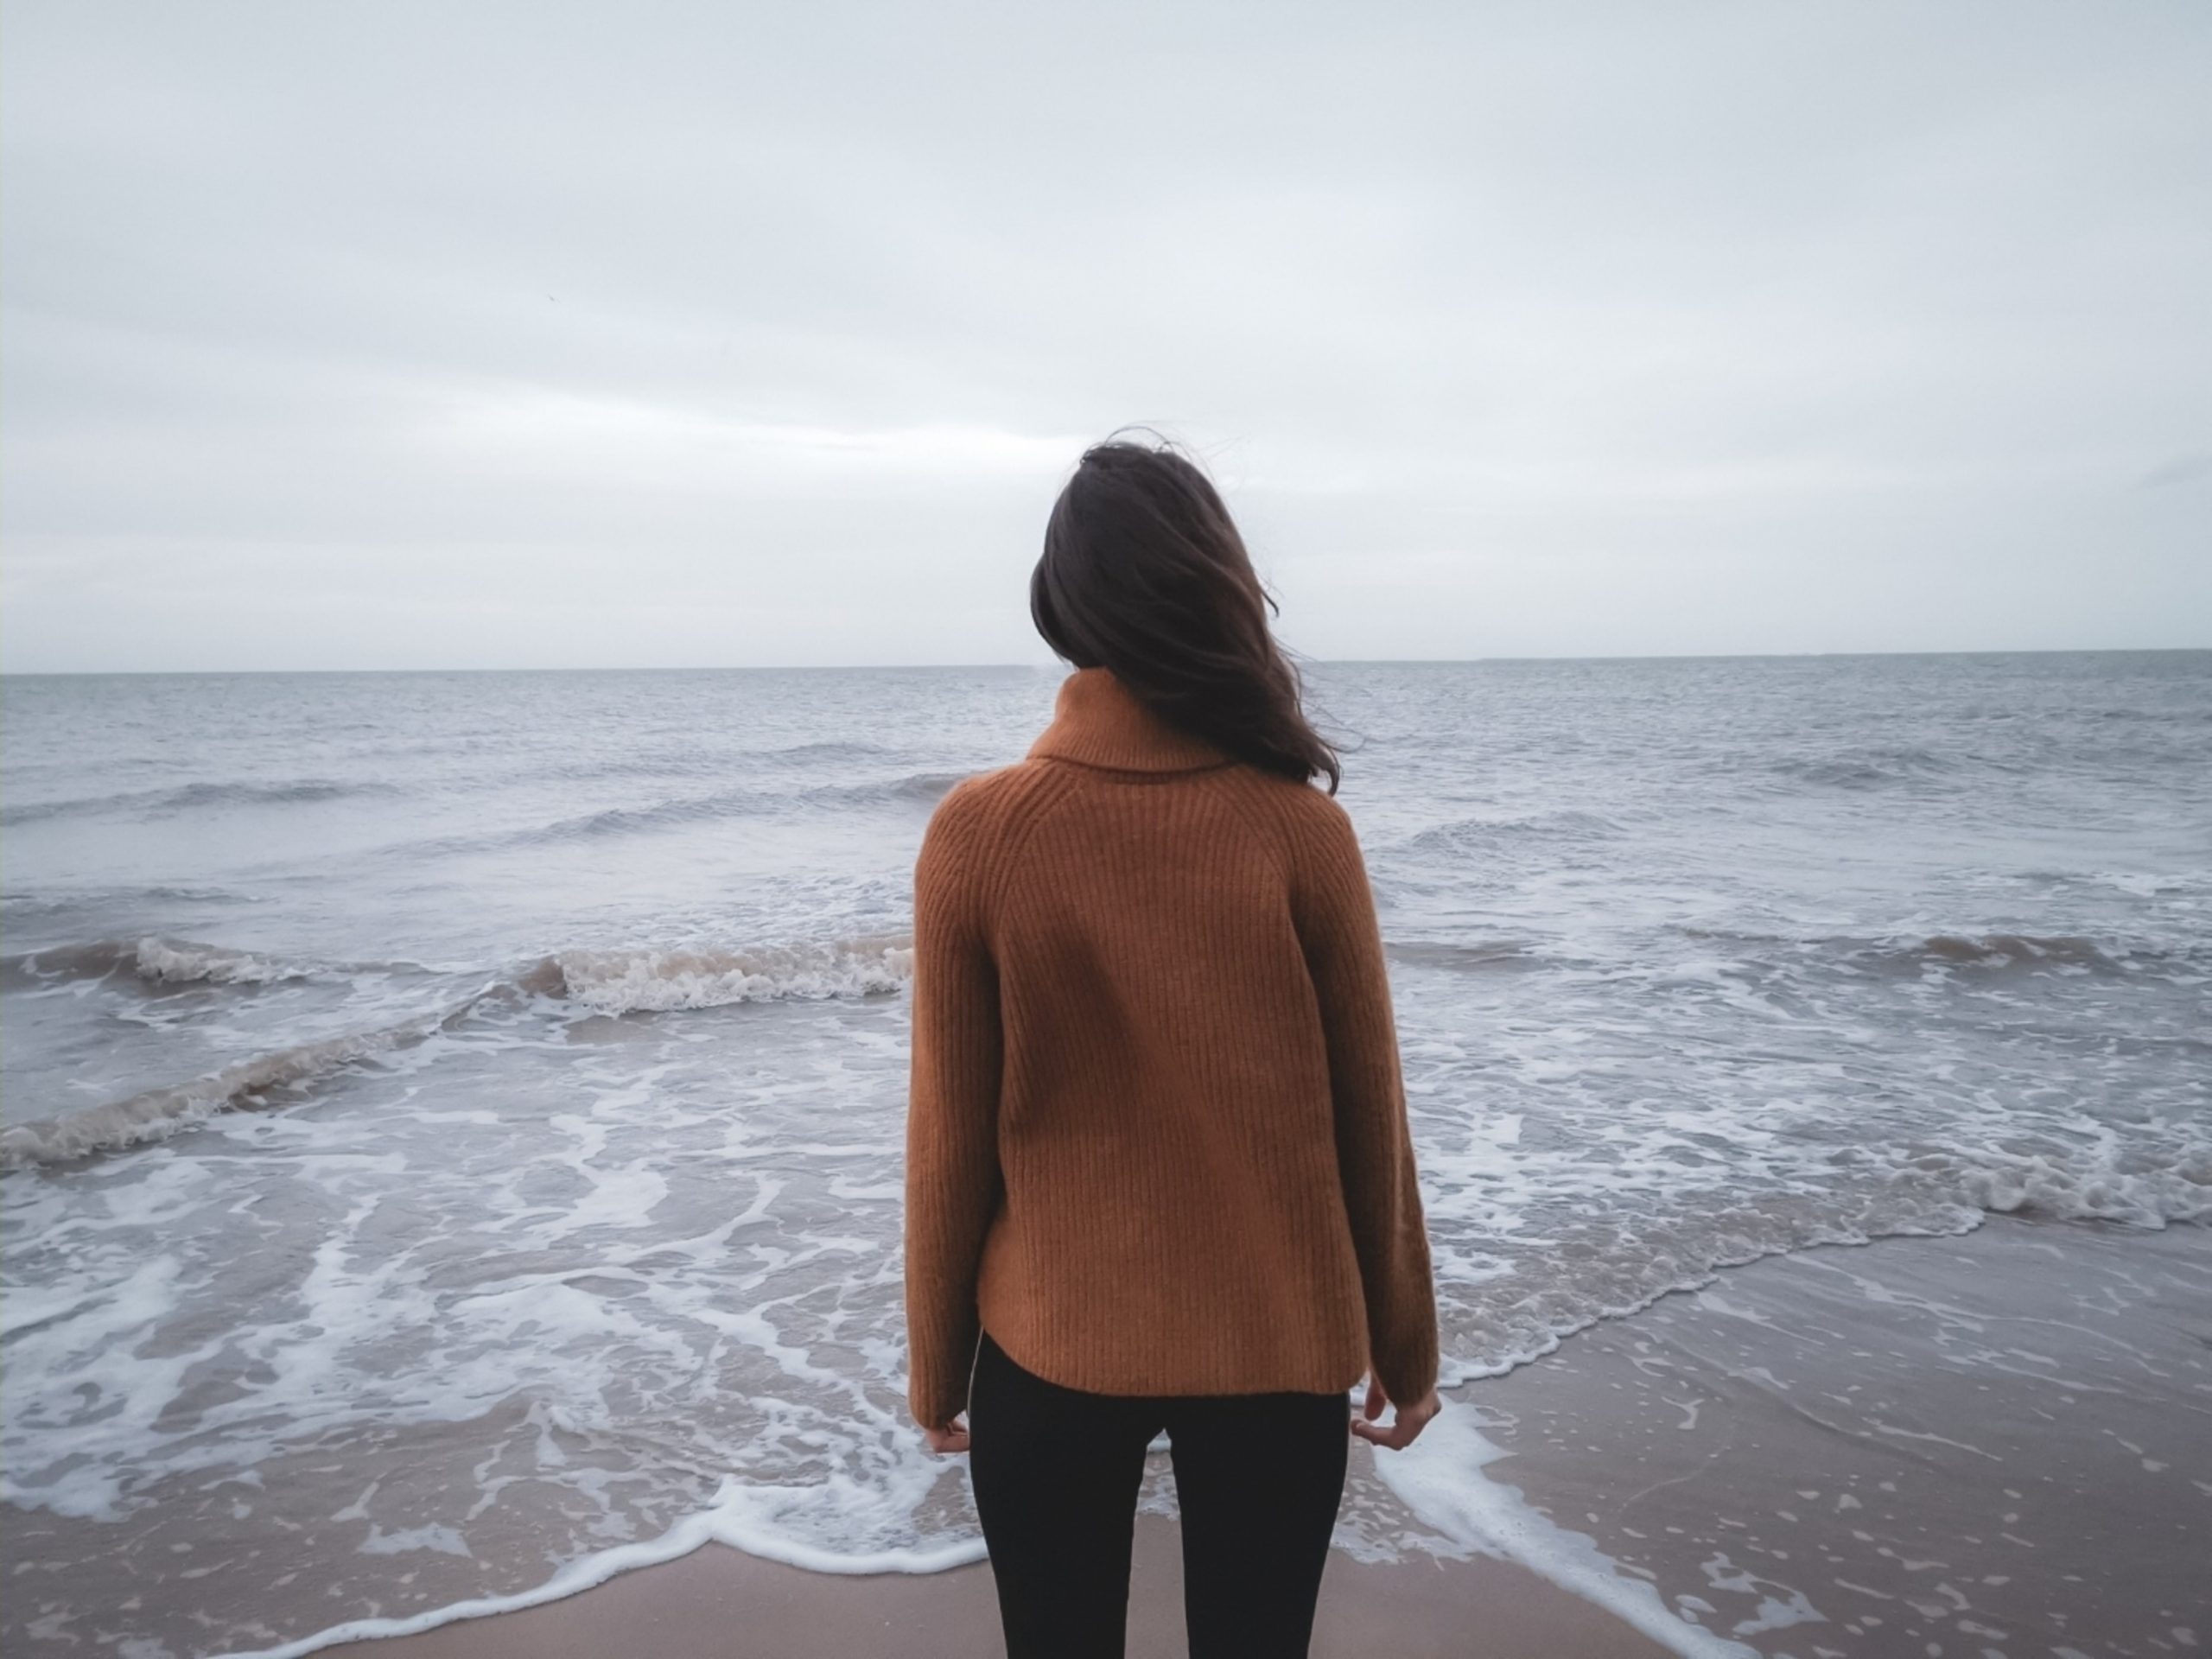 Woman with Anxiety staring into the ocean